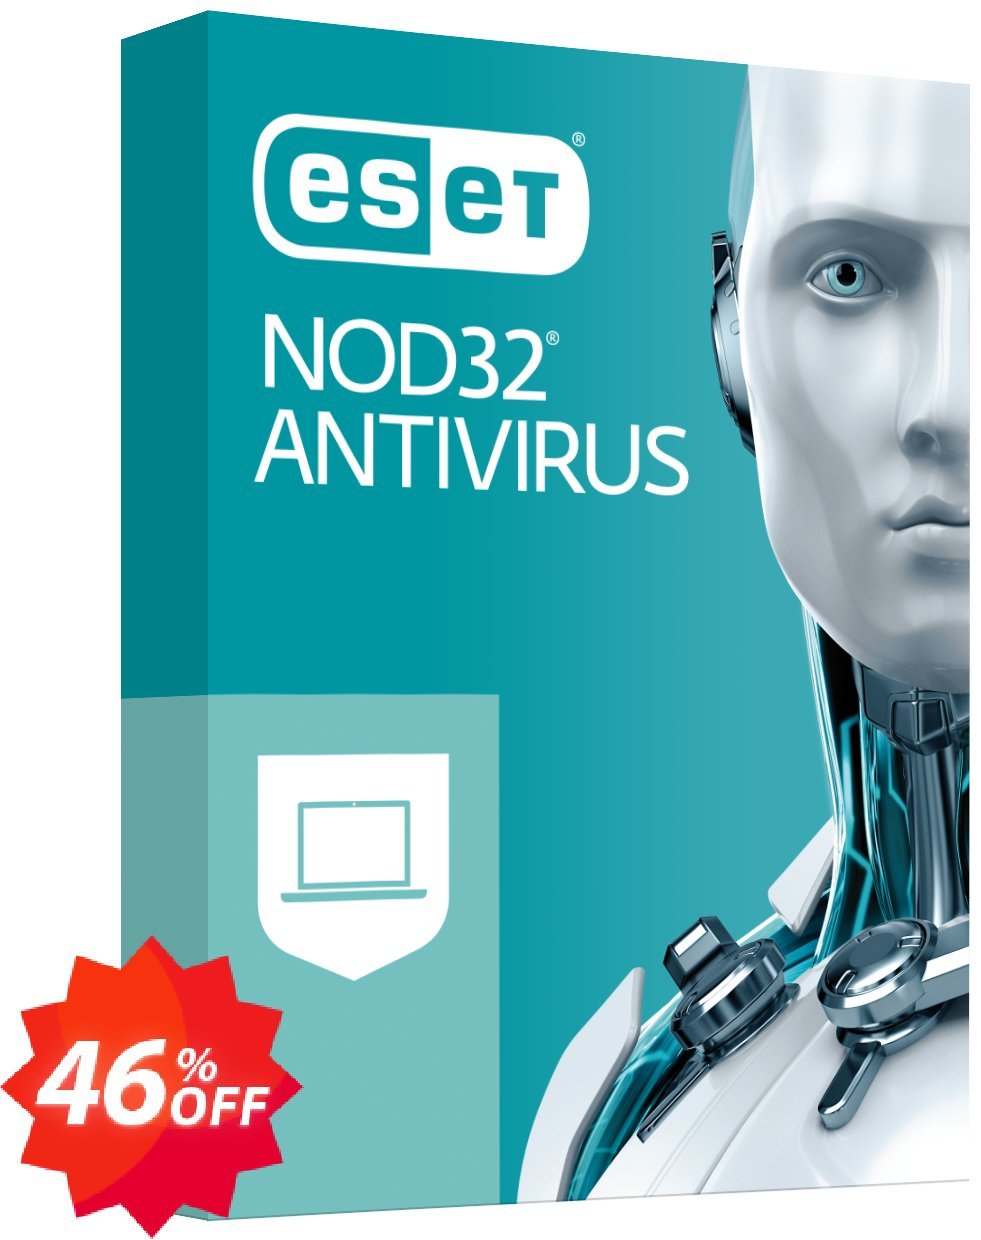 ESET NOD32 Antivirus - Renew Yearly 2 Devices Coupon code 46% discount 